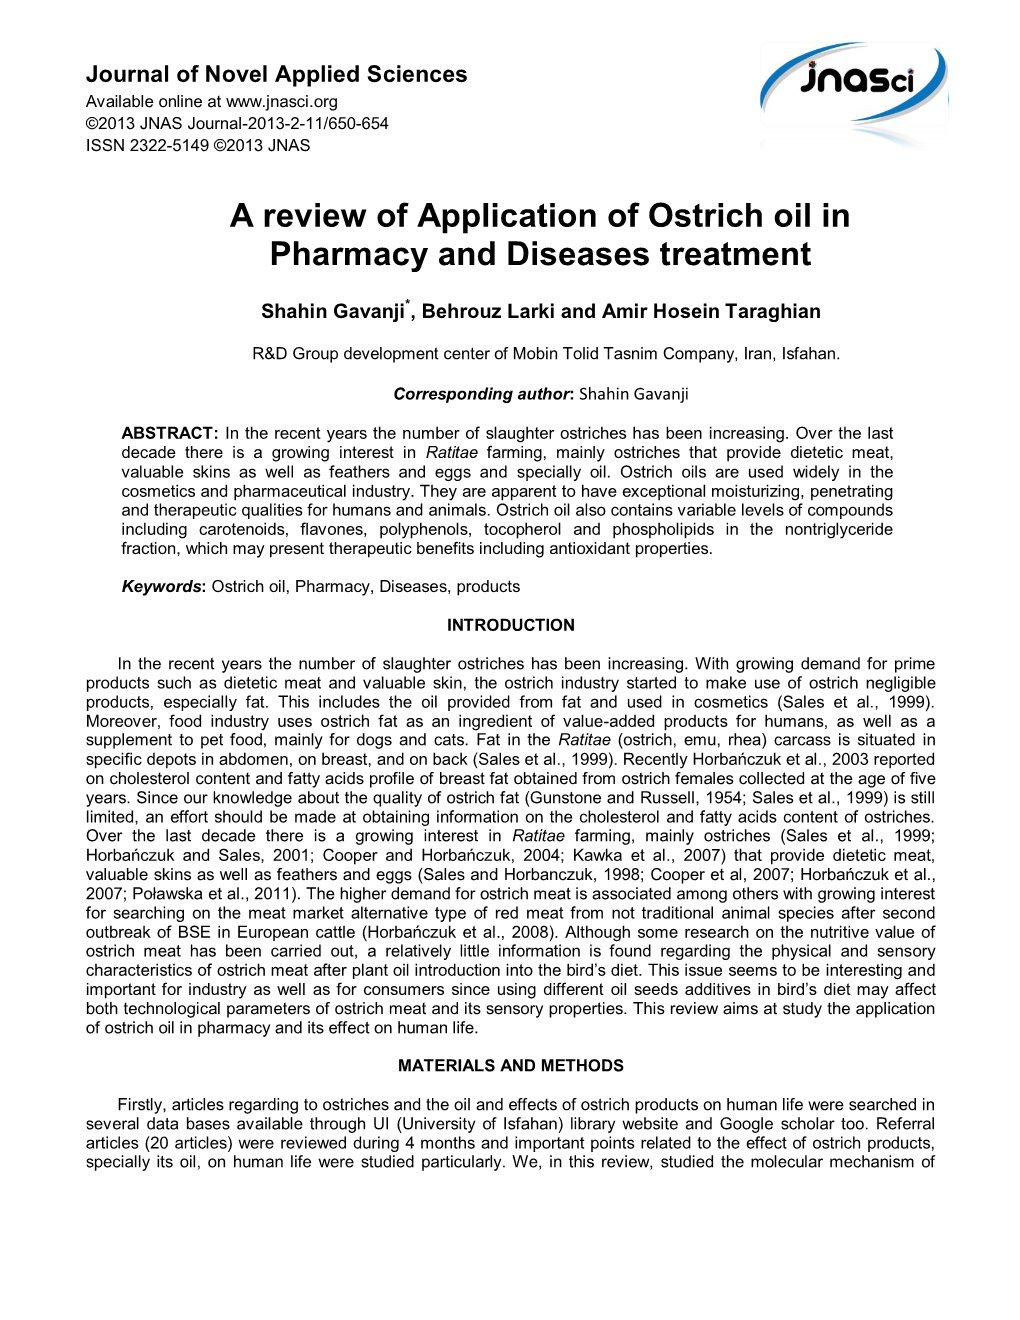 A Review of Application of Ostrich Oil in Pharmacy and Diseases Treatment